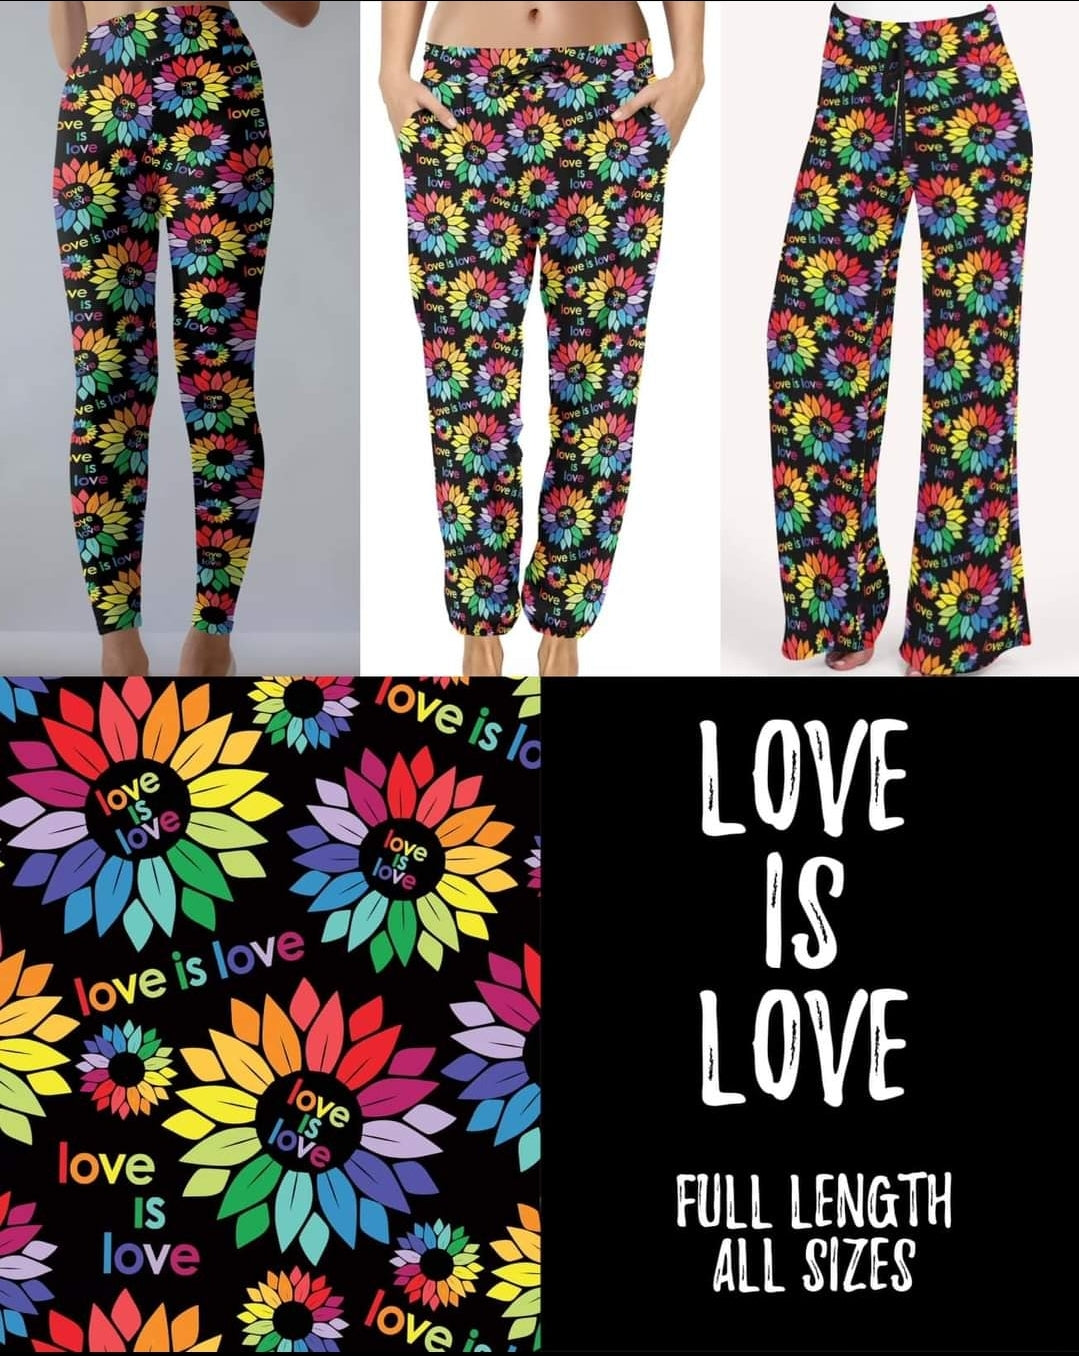 Love is love leggings, joggers and lounge pants